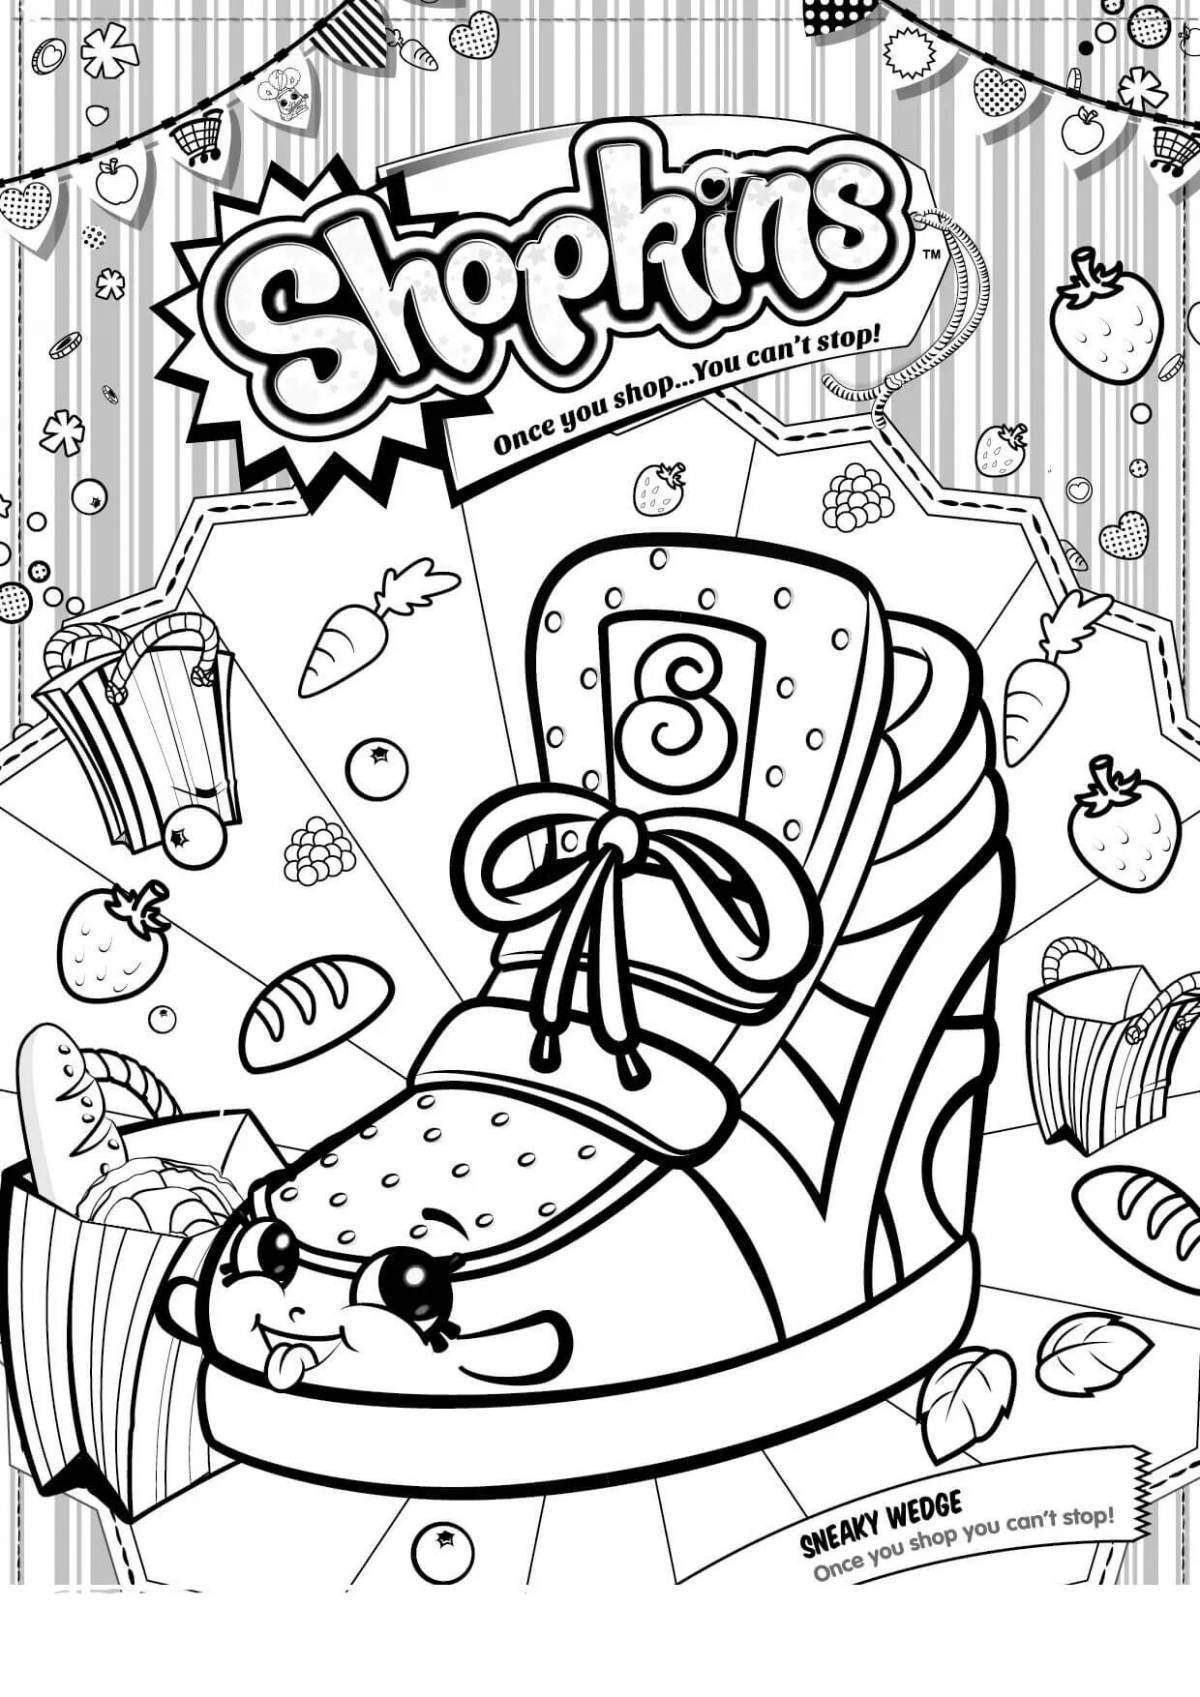 Crazy shopping coloring page